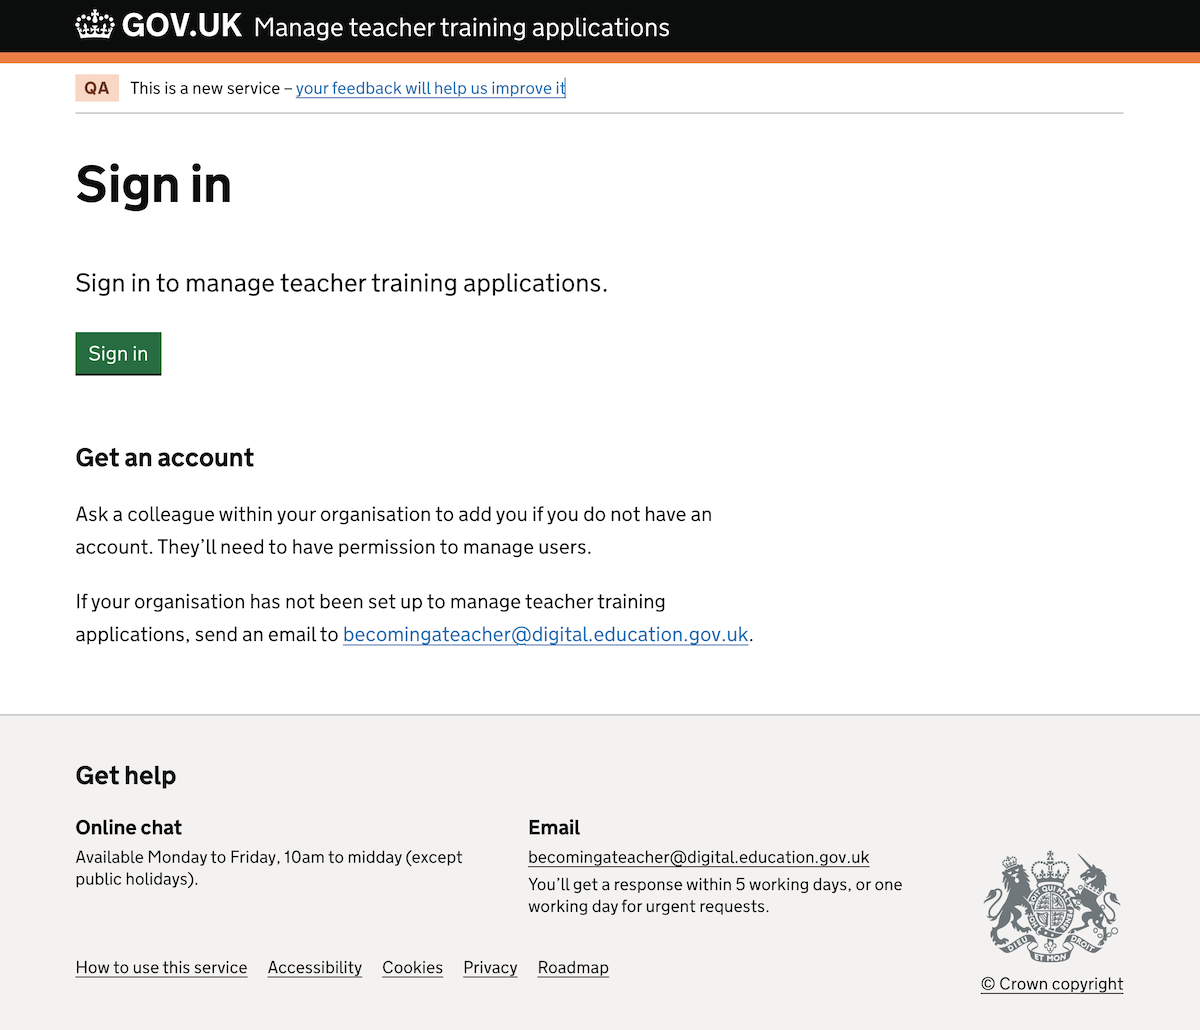 Interim page between the start page and DfE Sign-in